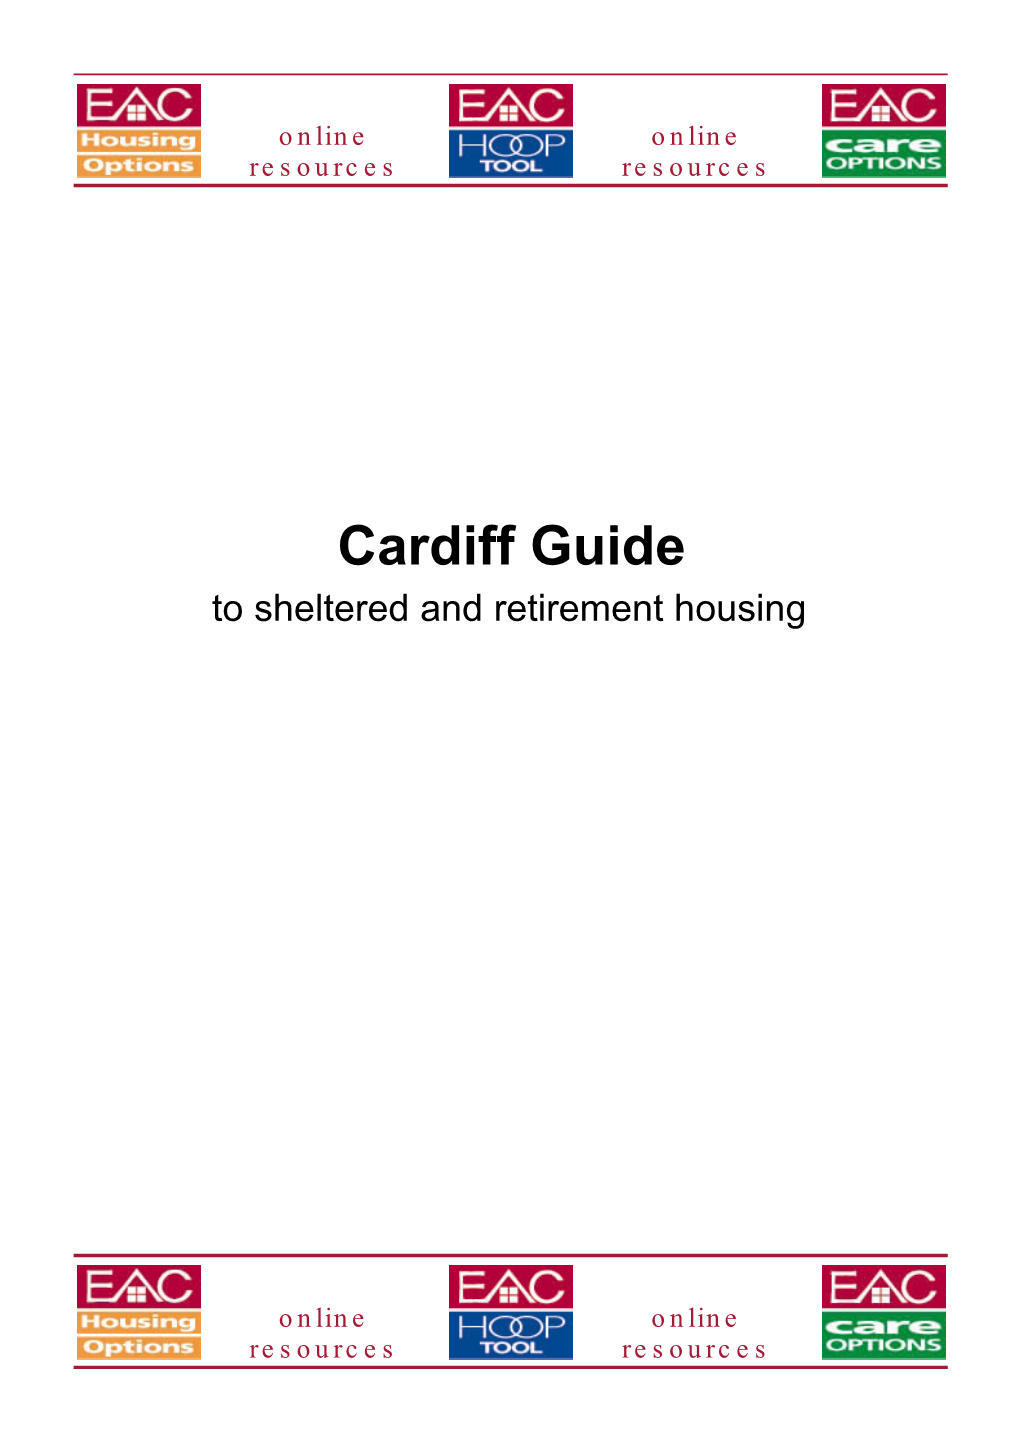 Cardiff Guide to Sheltered and Retirement Housing